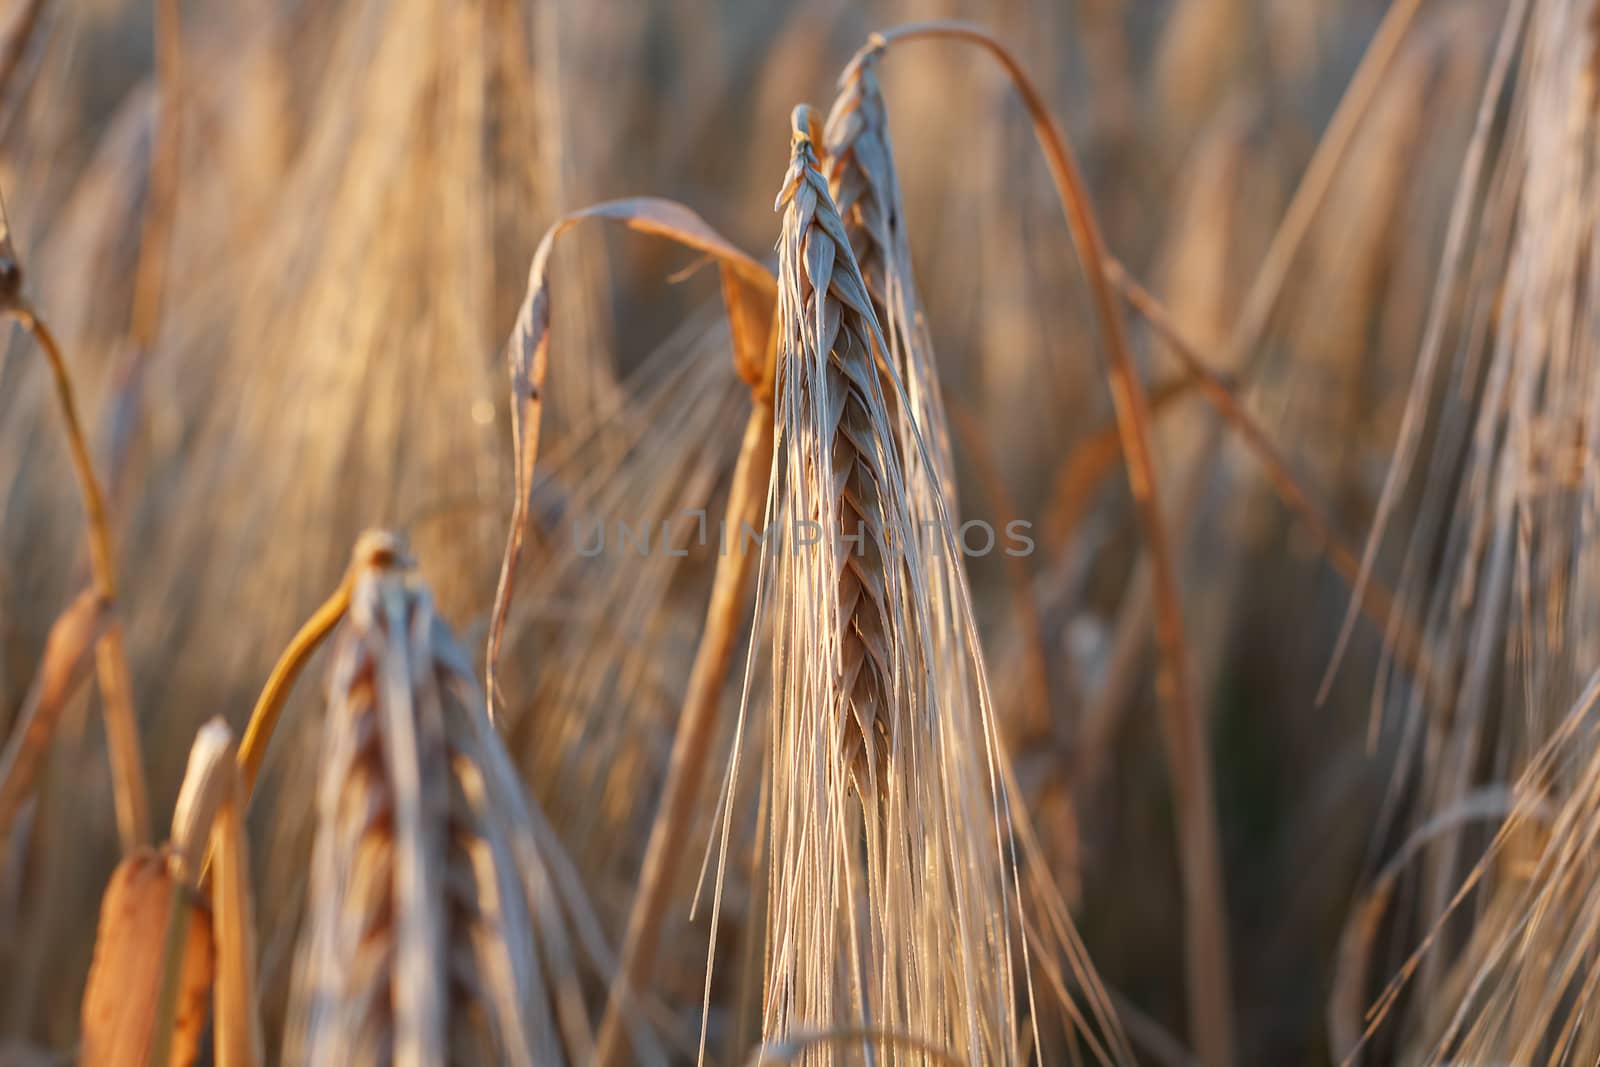 Photograph on the field of ripe golden wheat.